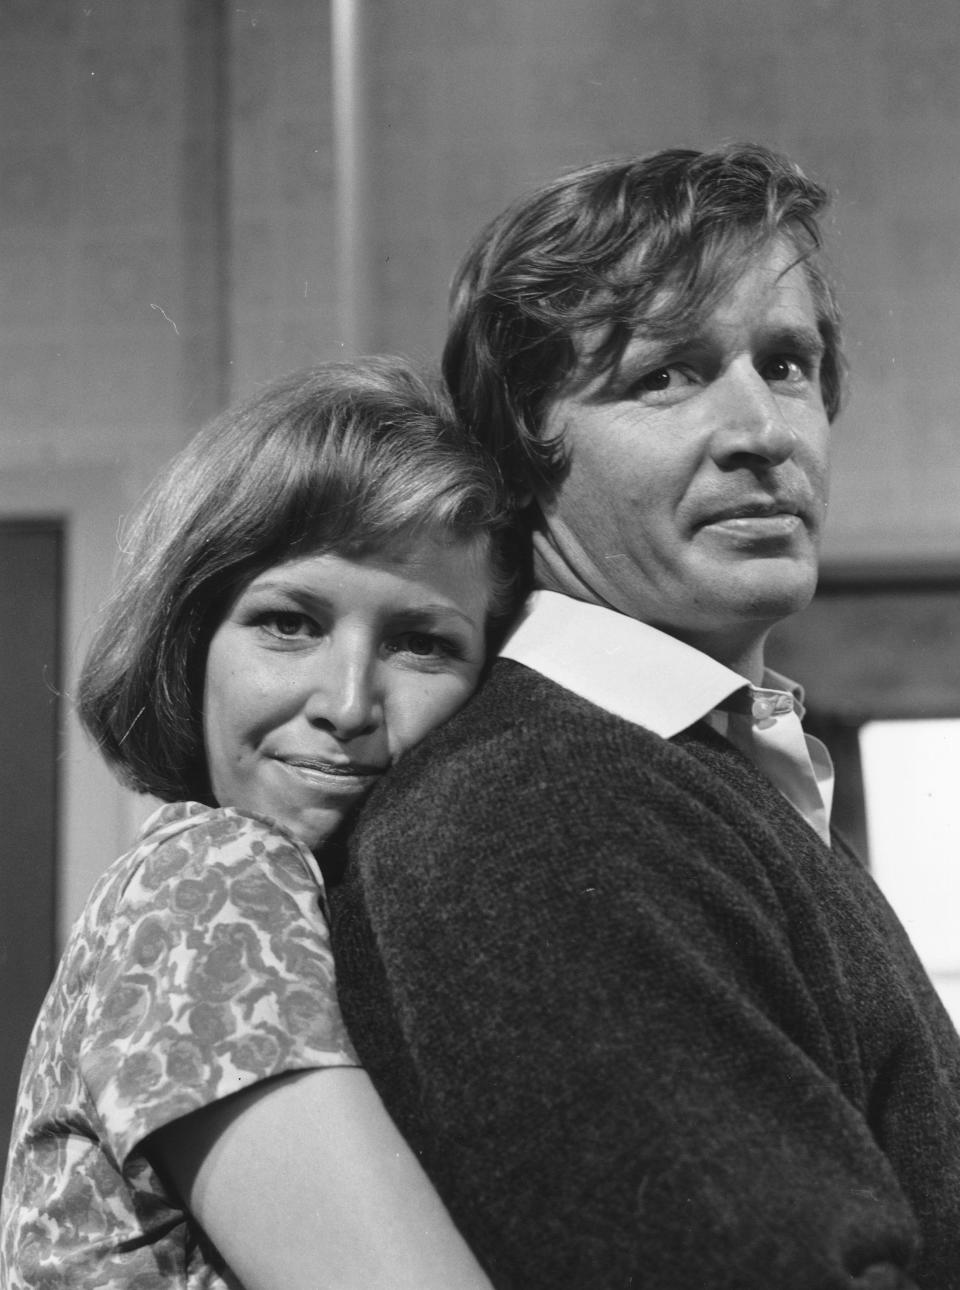 circa 1965:  Actors William Roache and Anne Reid who play Ken and Valerie Barlow in the English television soap opera 'Coronation Street'.  (Photo by John Madden/Keystone/Getty Images)